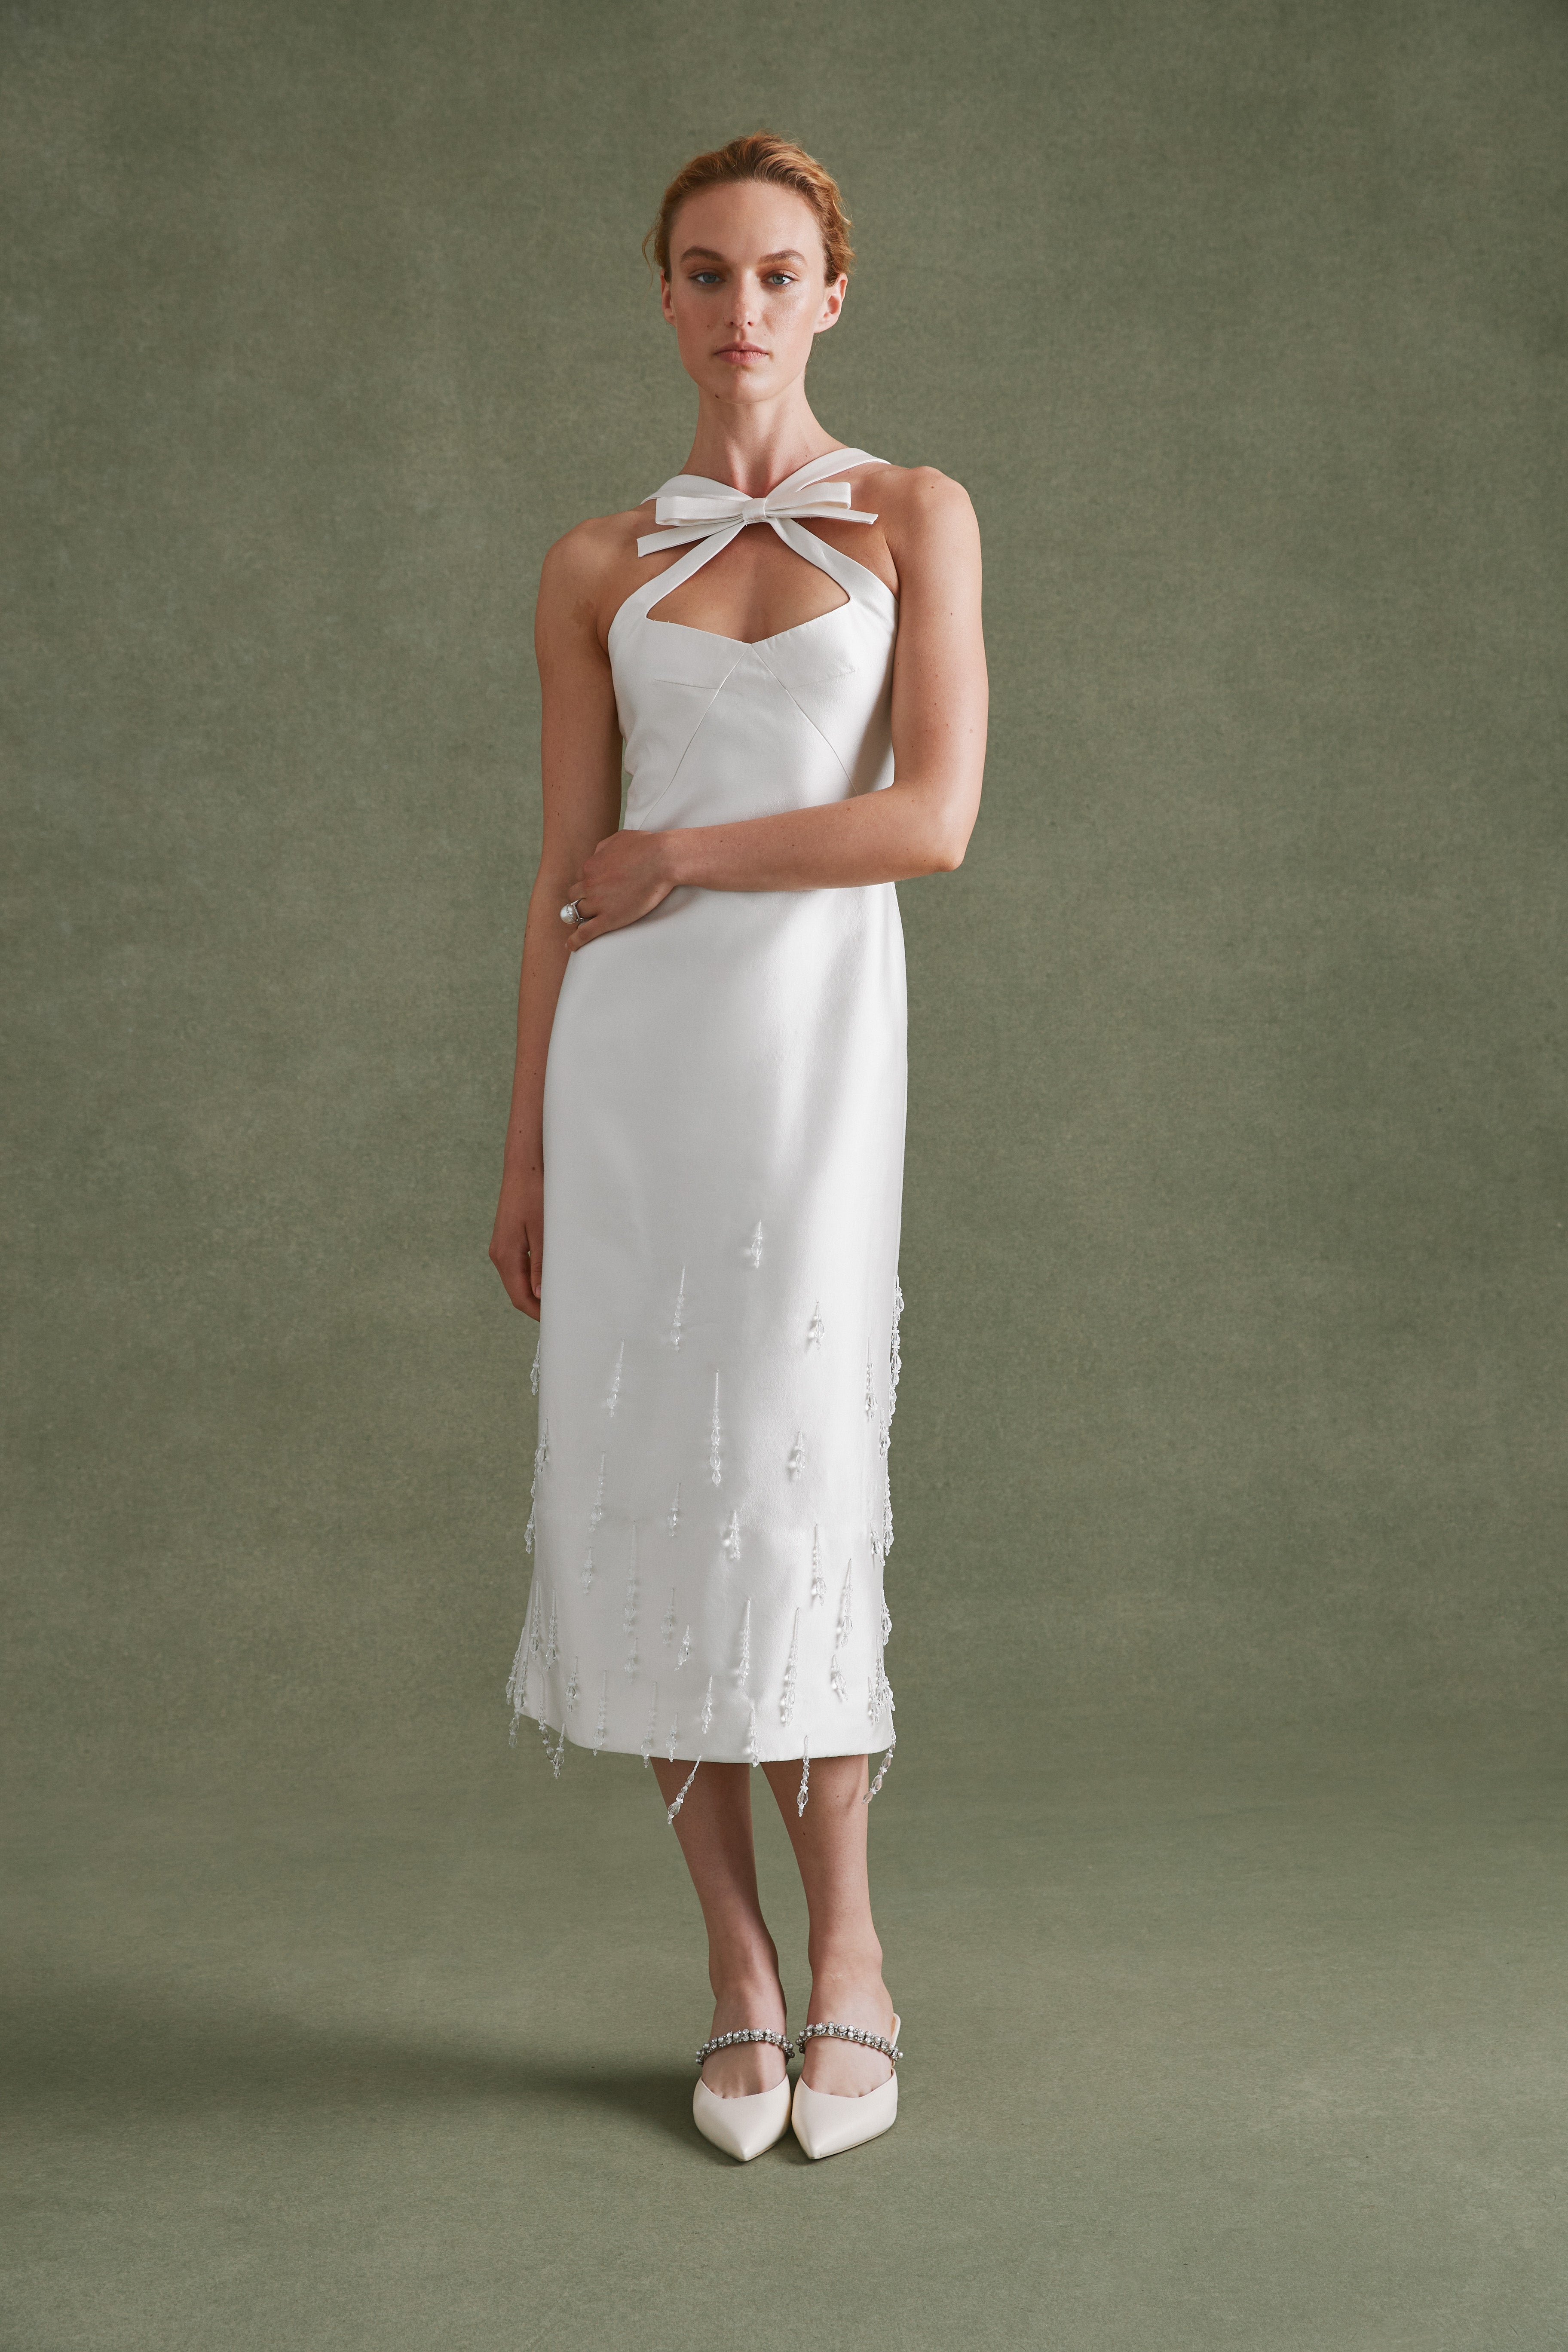 Alexandra Pijut Delphine Dress. Ivory silk wool bridal dress with bow and beading. Midi dress. Rehearsal dinner, wedding dress, welcome dinner, after party dress.